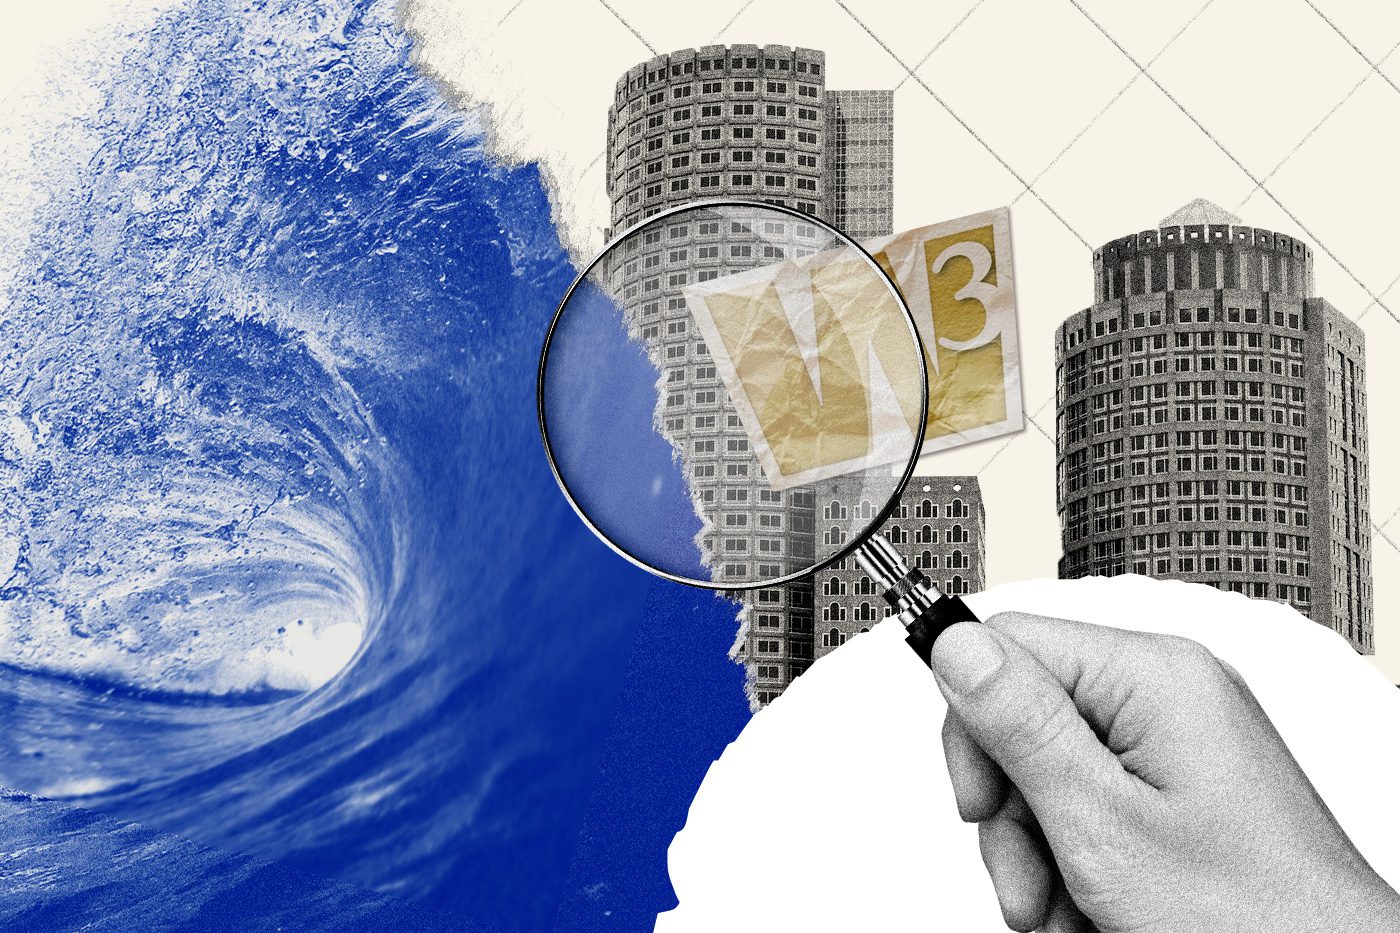 Collage of a wave, buildings, and the W3 logo under a magnifying glass.